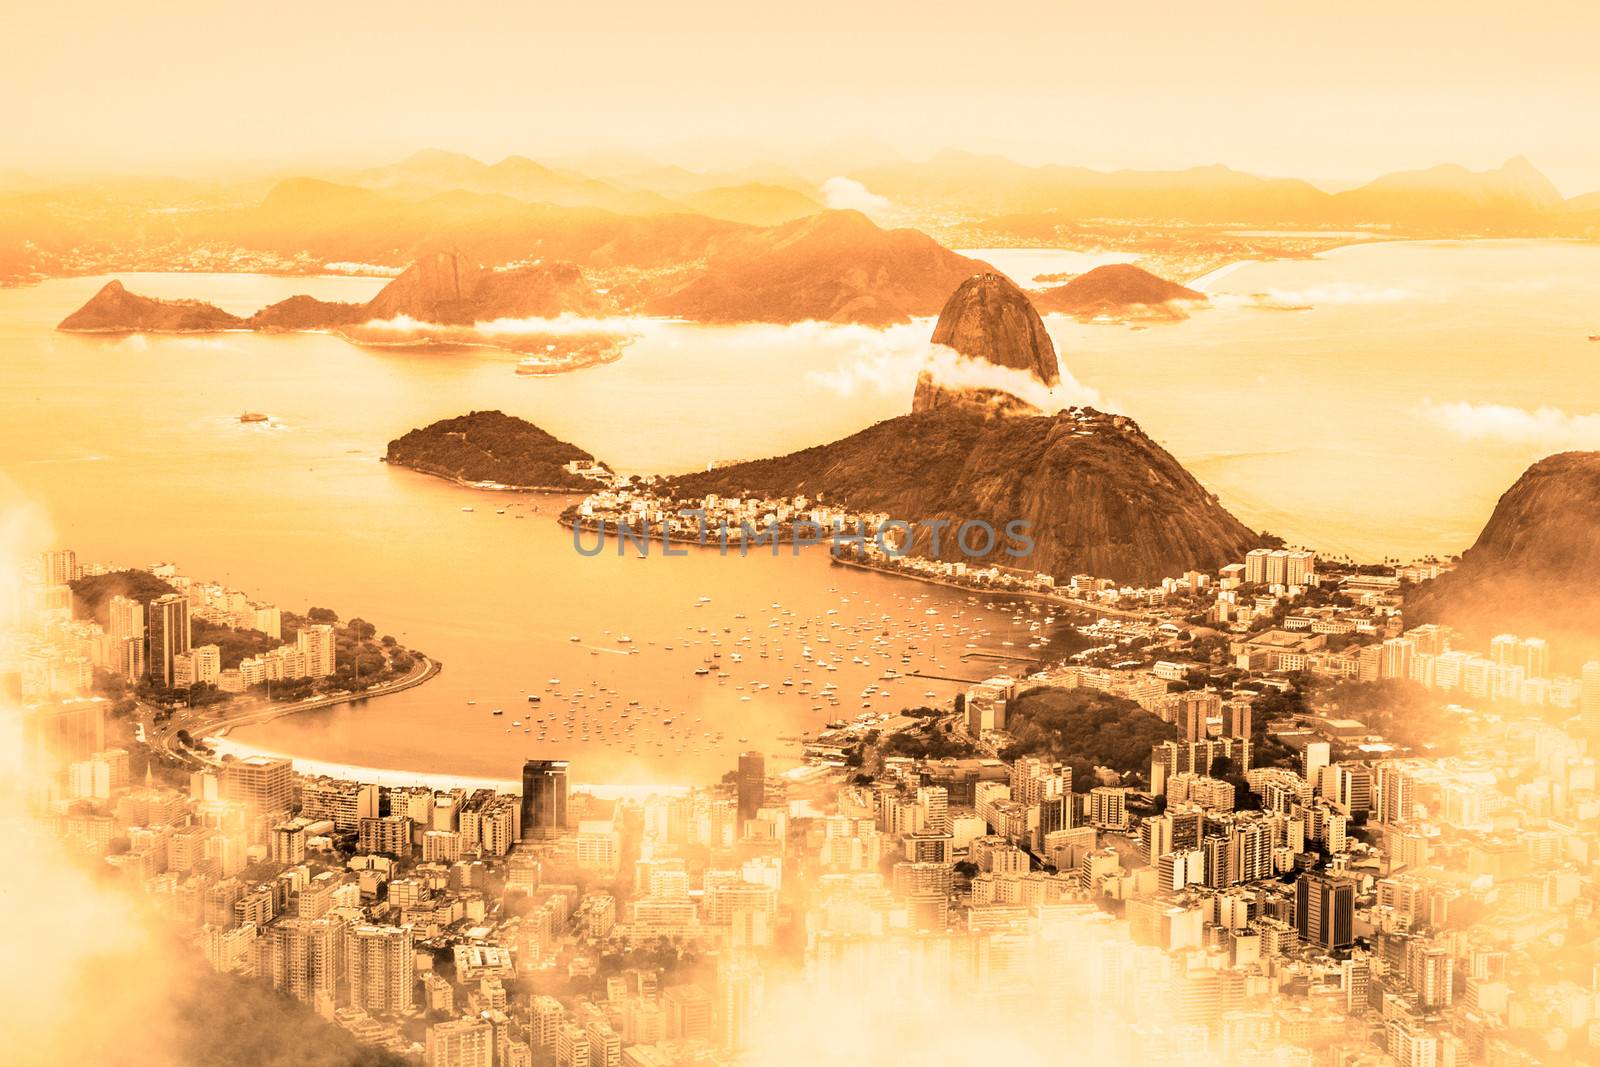 Rio de Janeiro, Brazil. Suggar Loaf and  Botafogo beach viewed from Corcovado at sunrise.